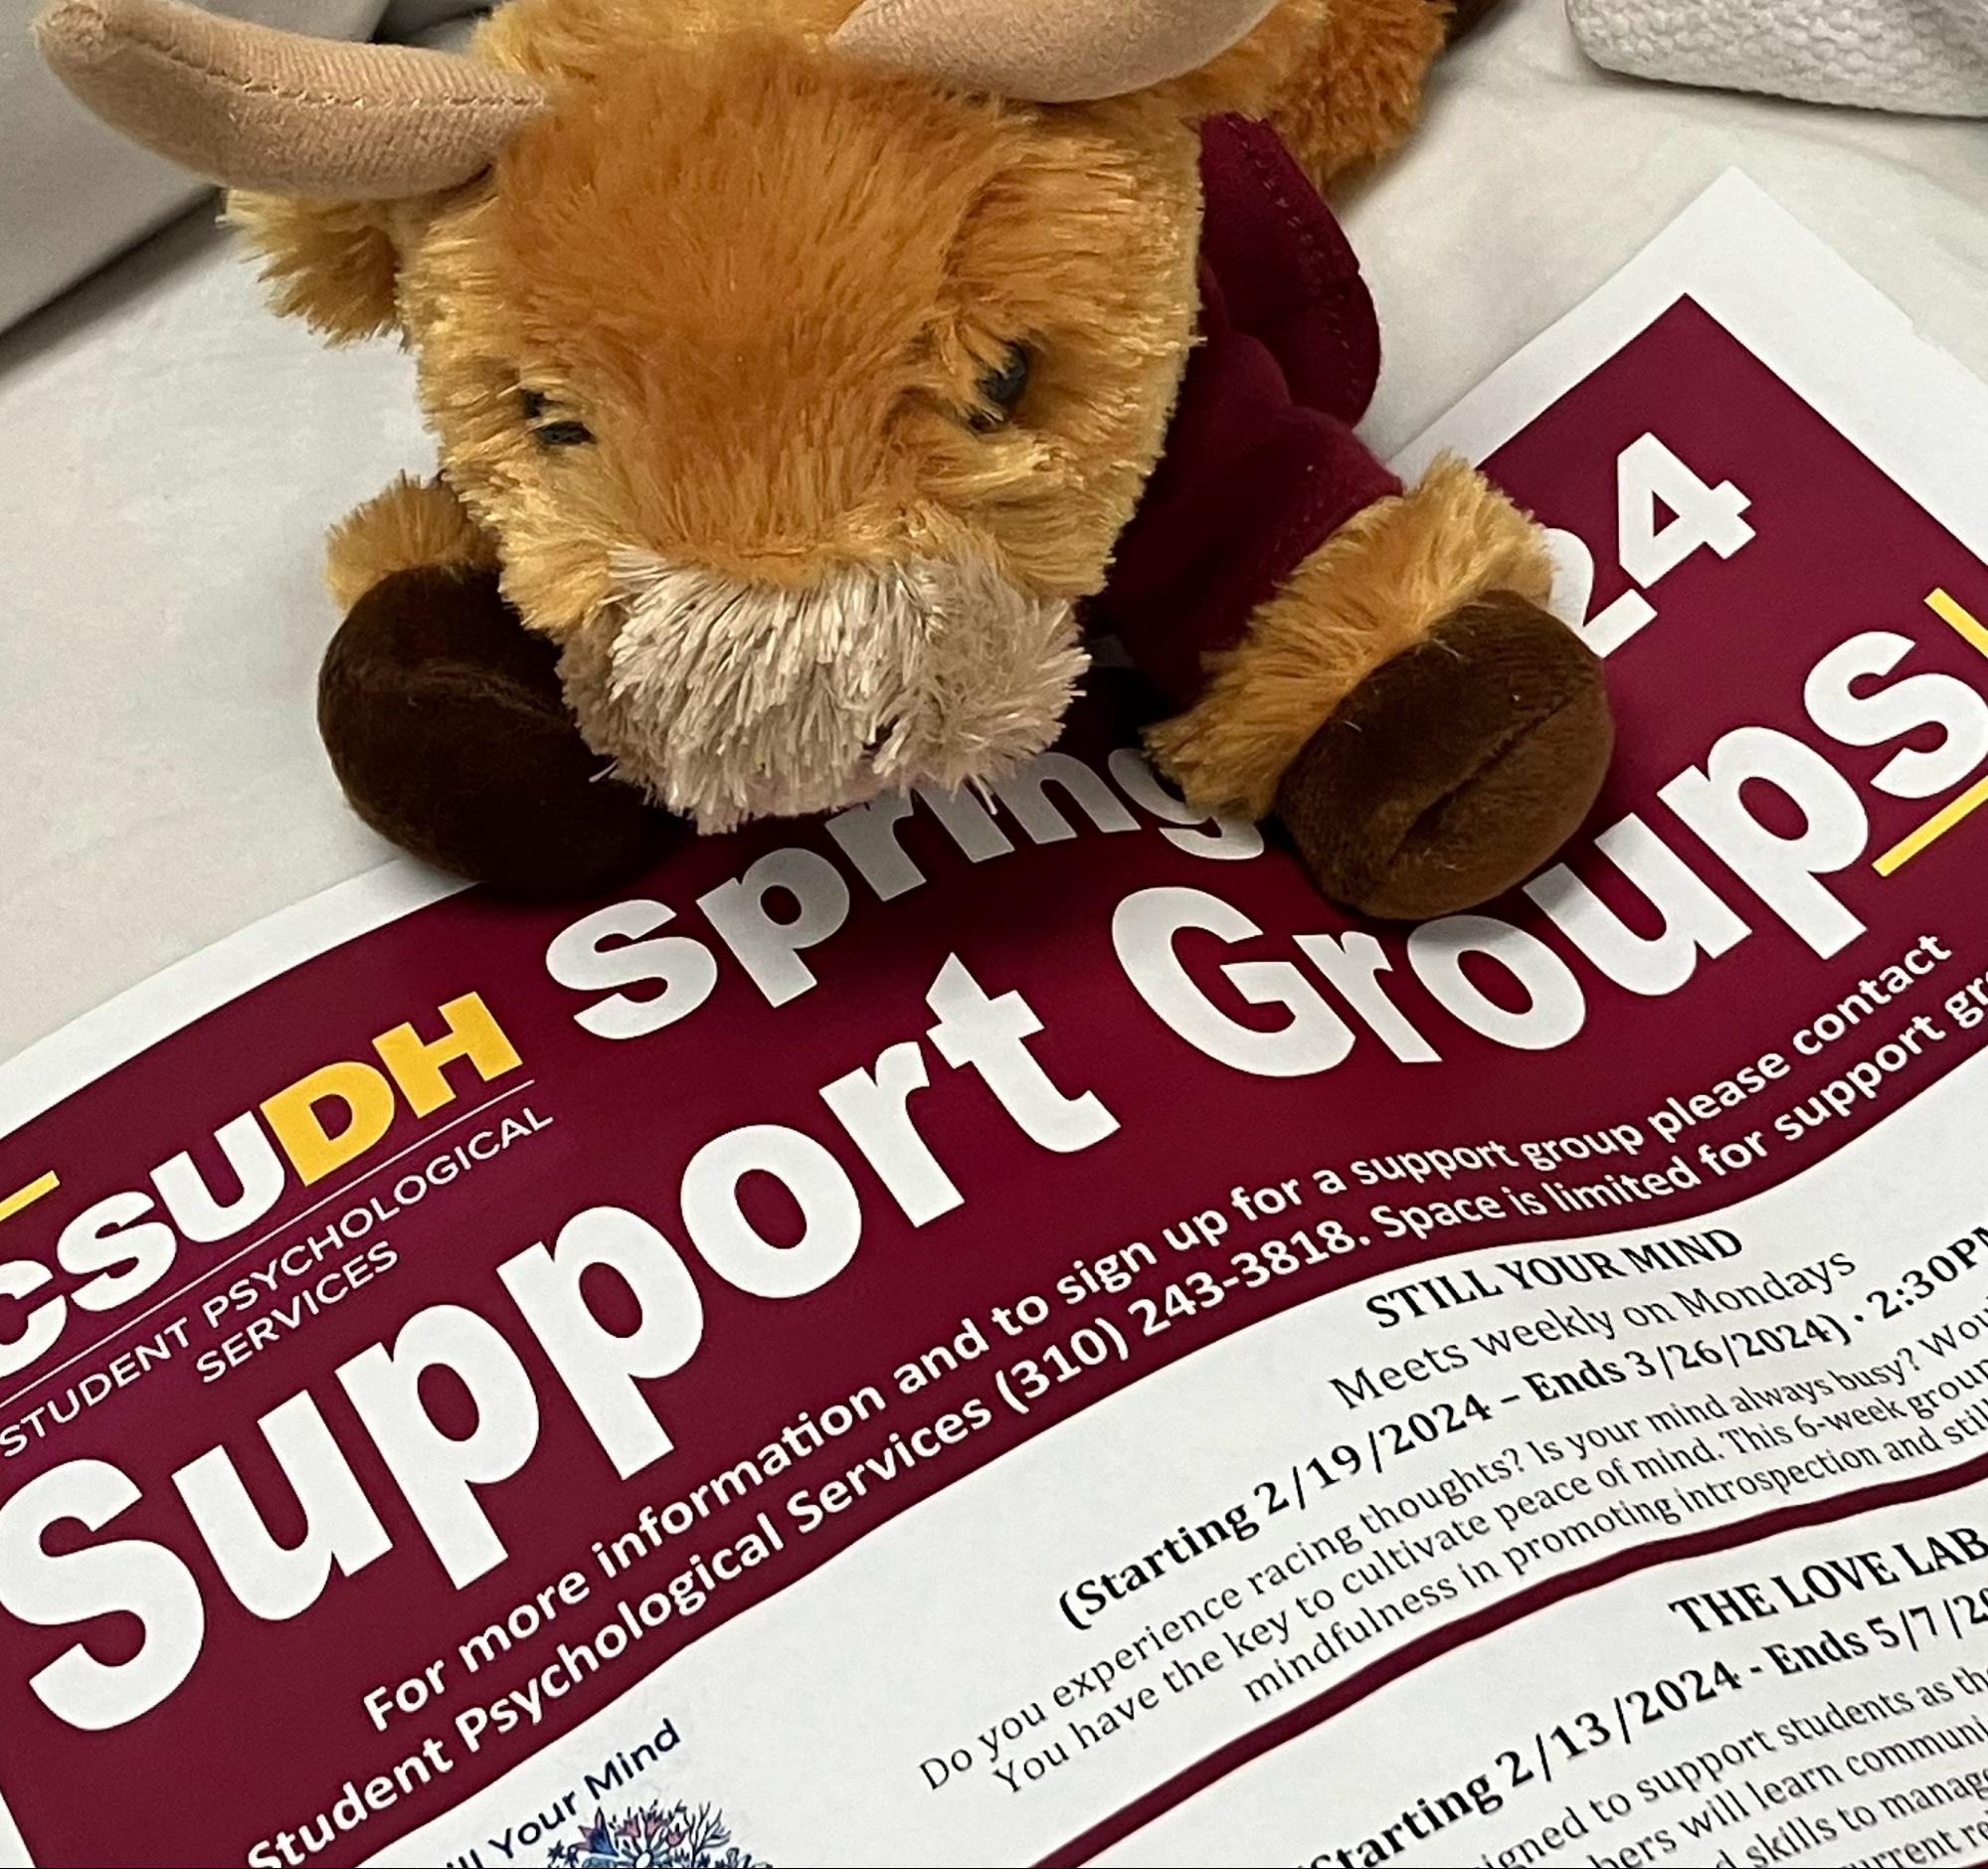 Photo of a bull plushie on a flyer for support groups.